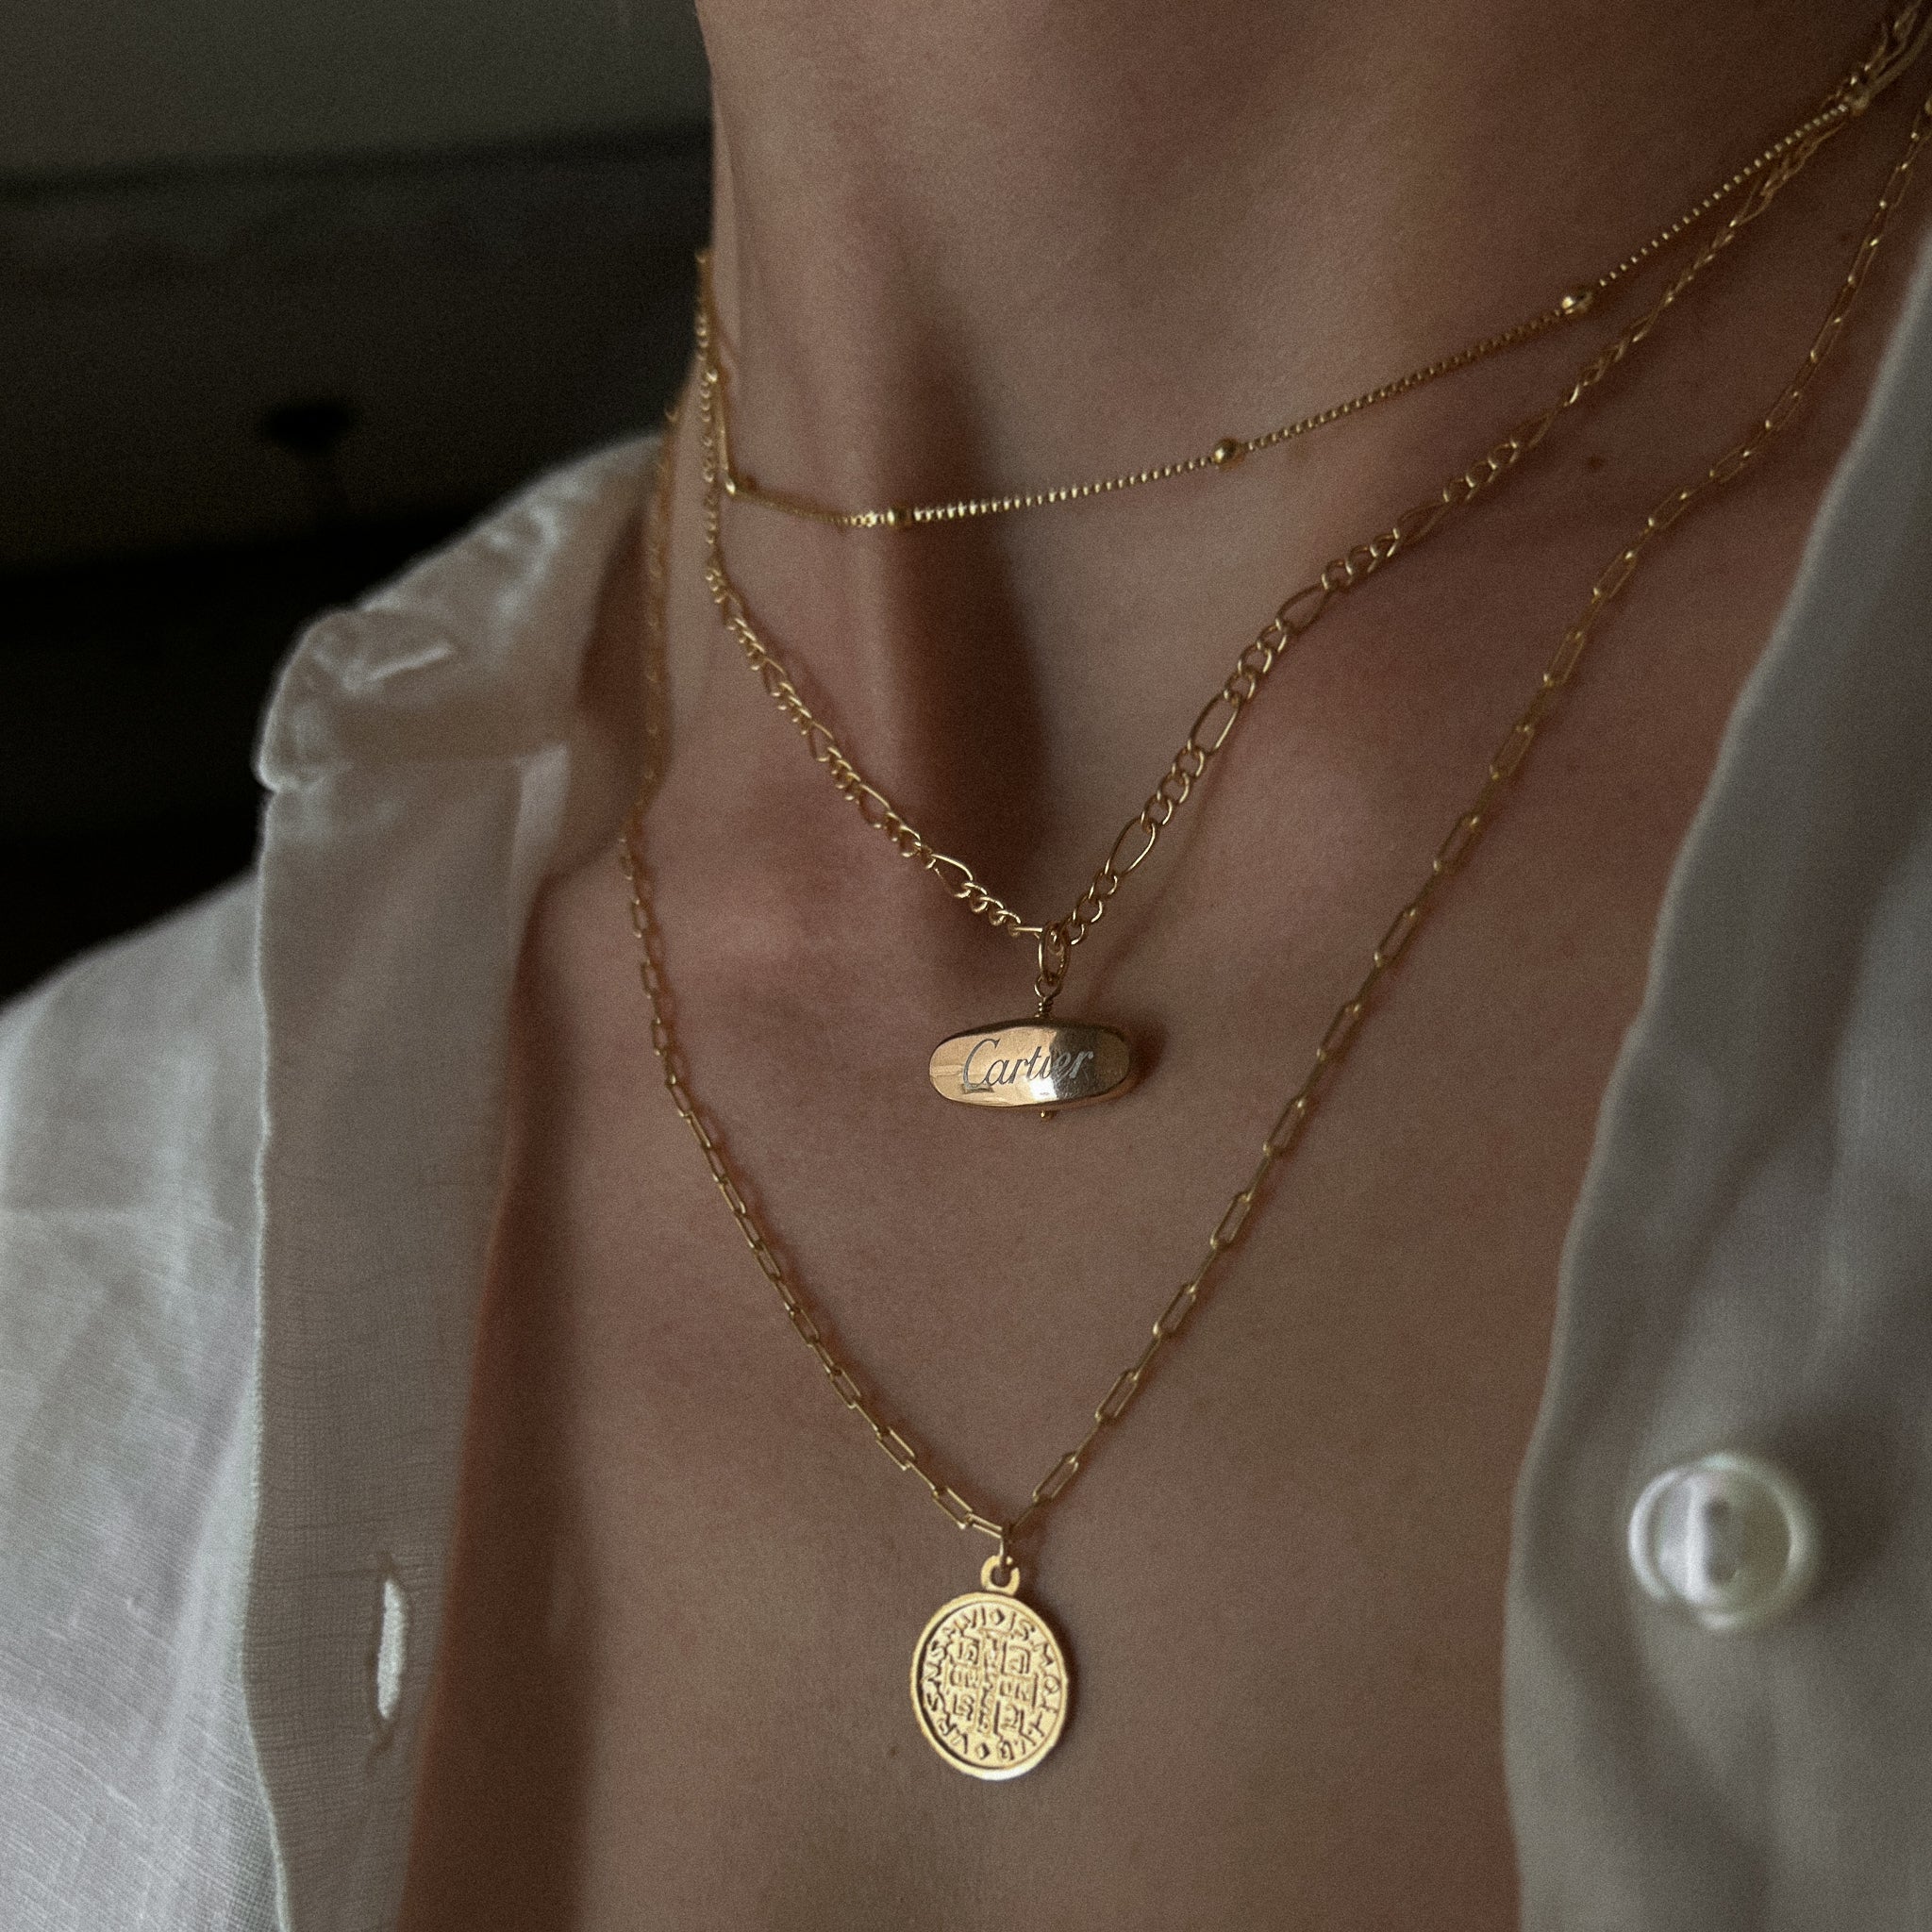 Vintage Authentic Repurposed Designer Cartier Pendant Necklace on 18k Gold Filled Satellite ball Chain